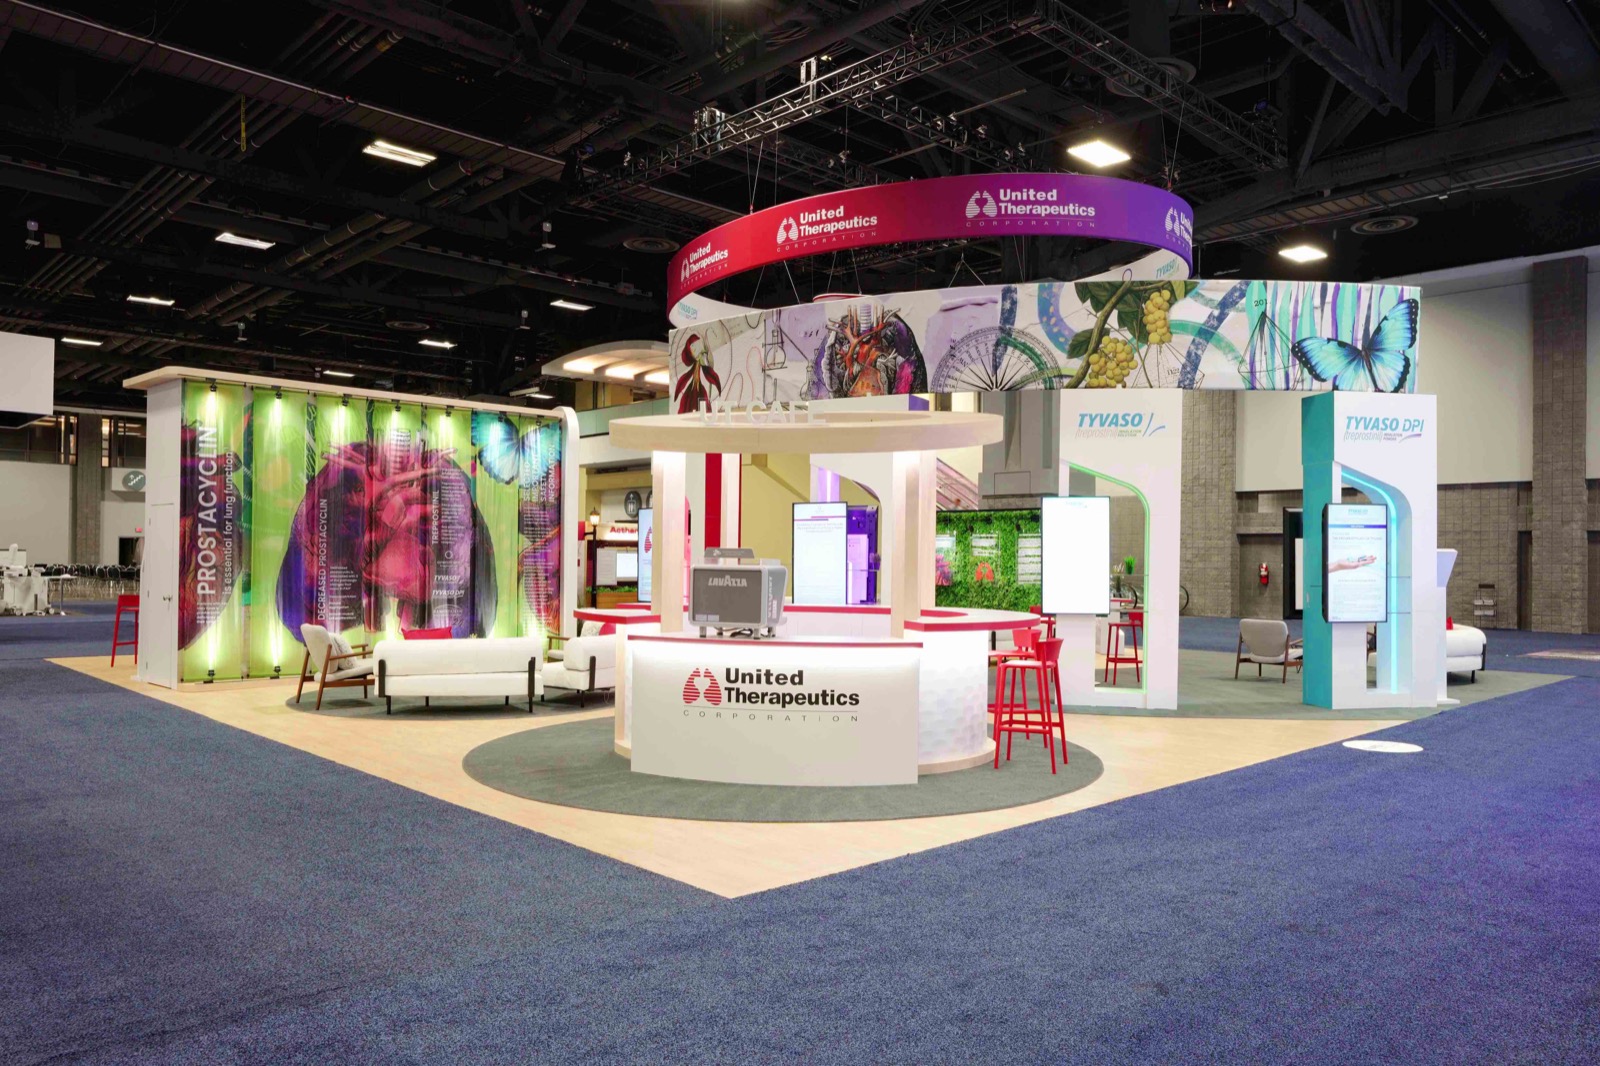 Marketing display booth at a large event center